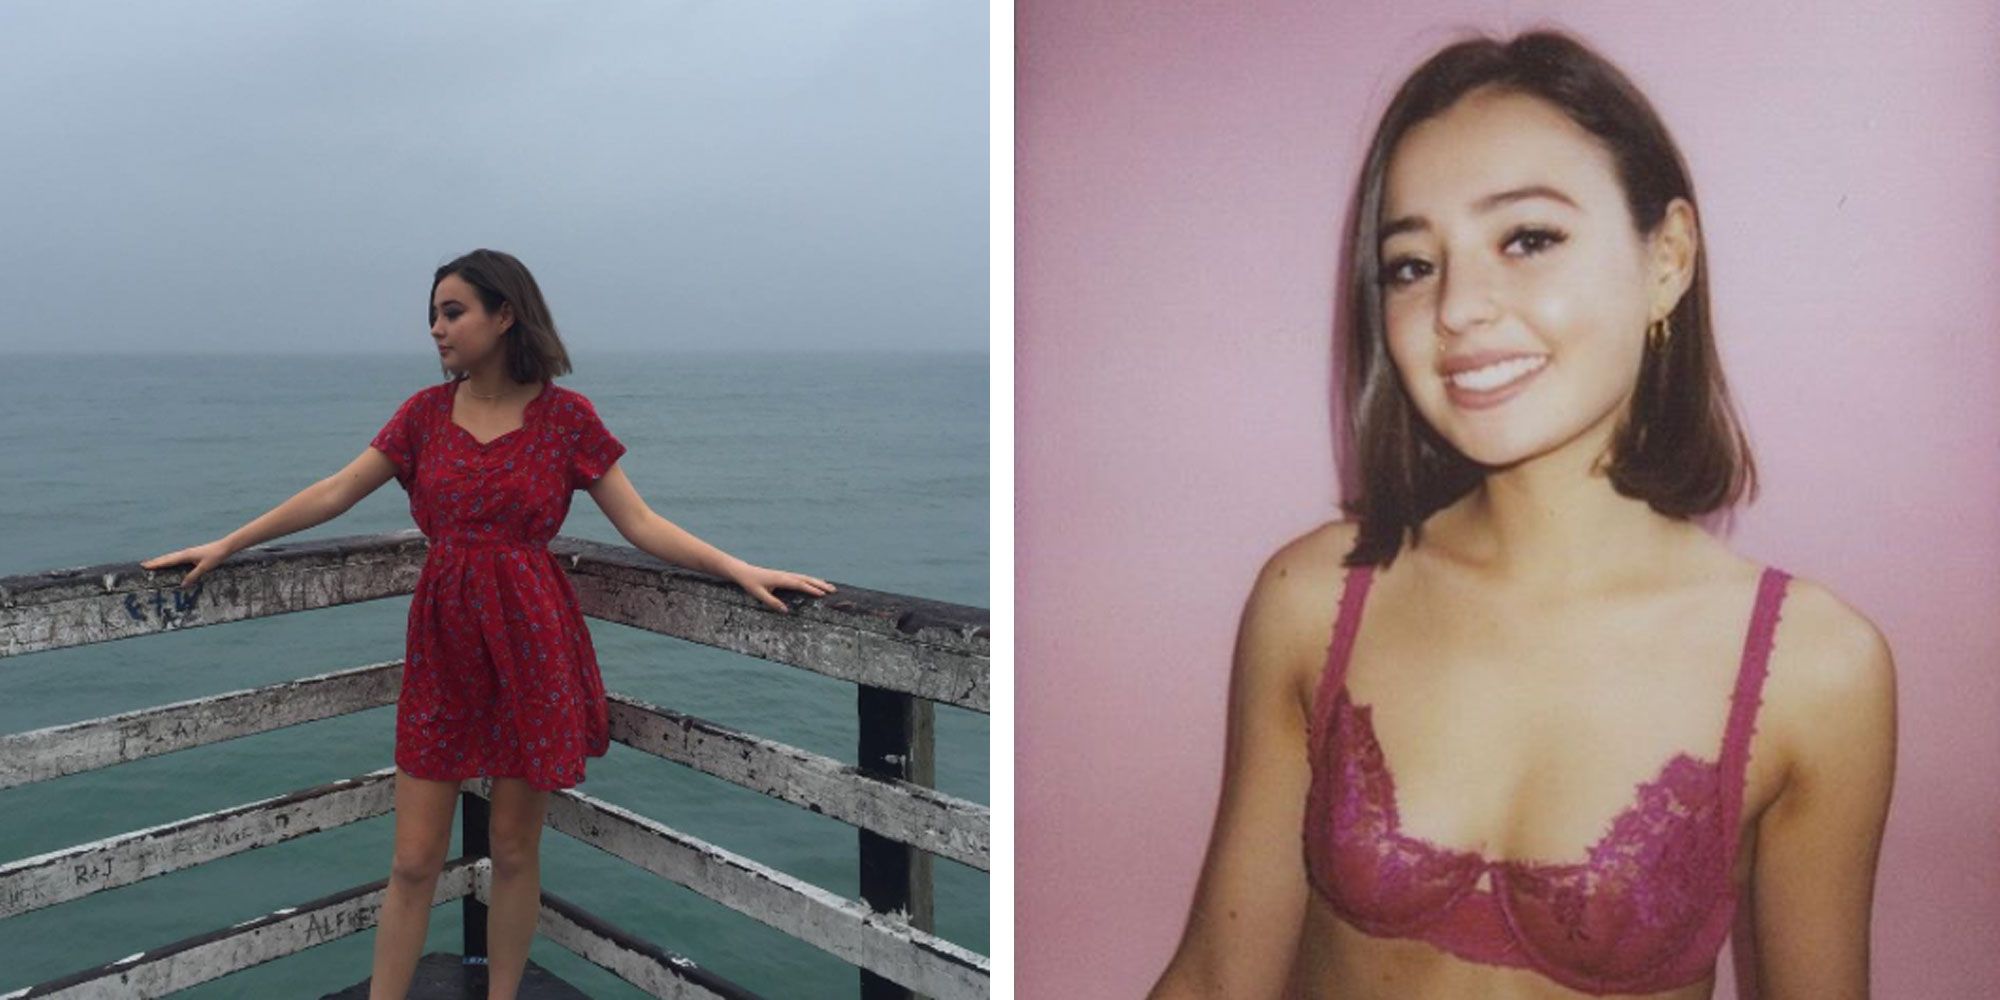 20-Year-Old Instagram Star Eileen Kelly Refutes Claim That Her Account Promotes Sex With Young Girls photo